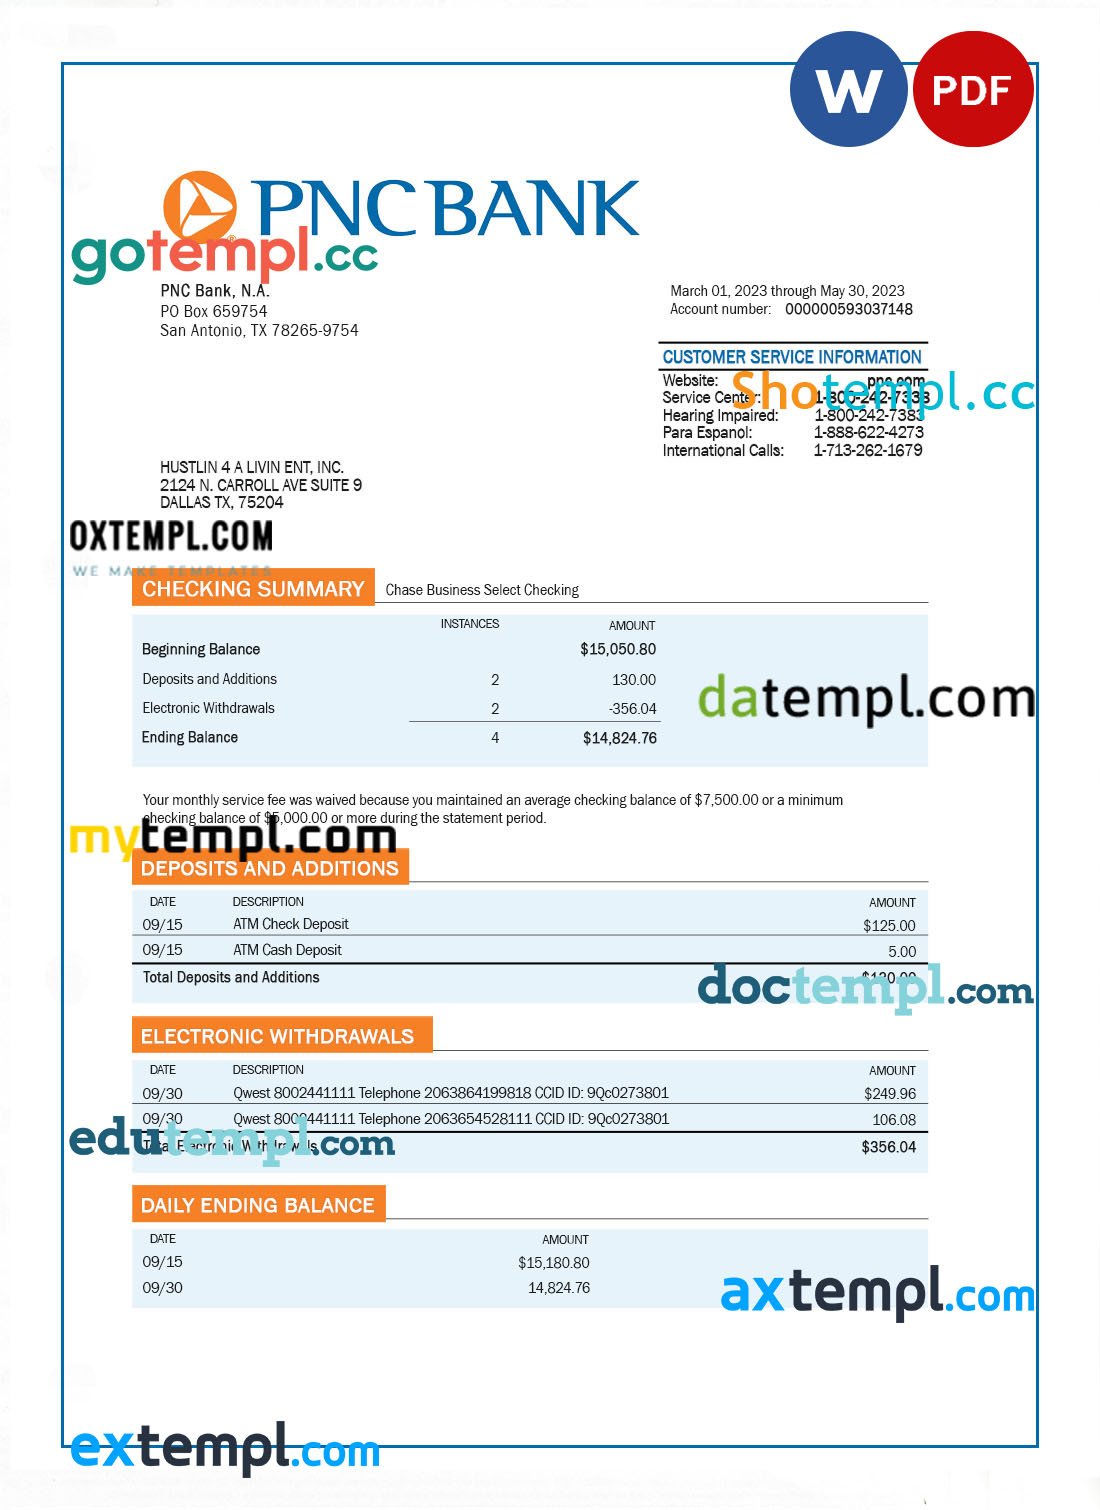 Natixis bank corporate checking account statement Word and PDF template